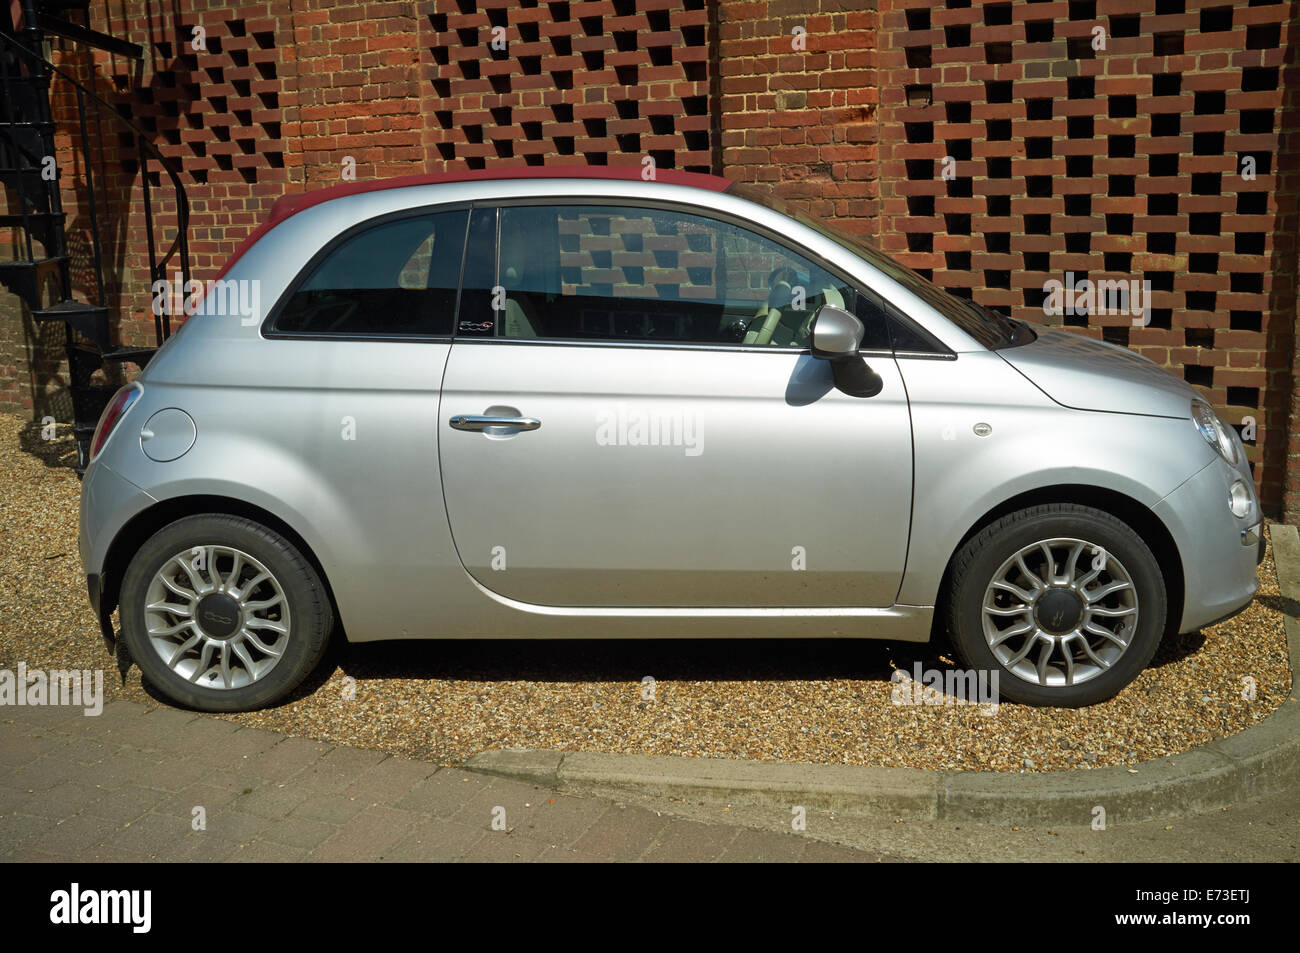 Fiat 500 uk High Resolution Stock Photography and Images - Alamy